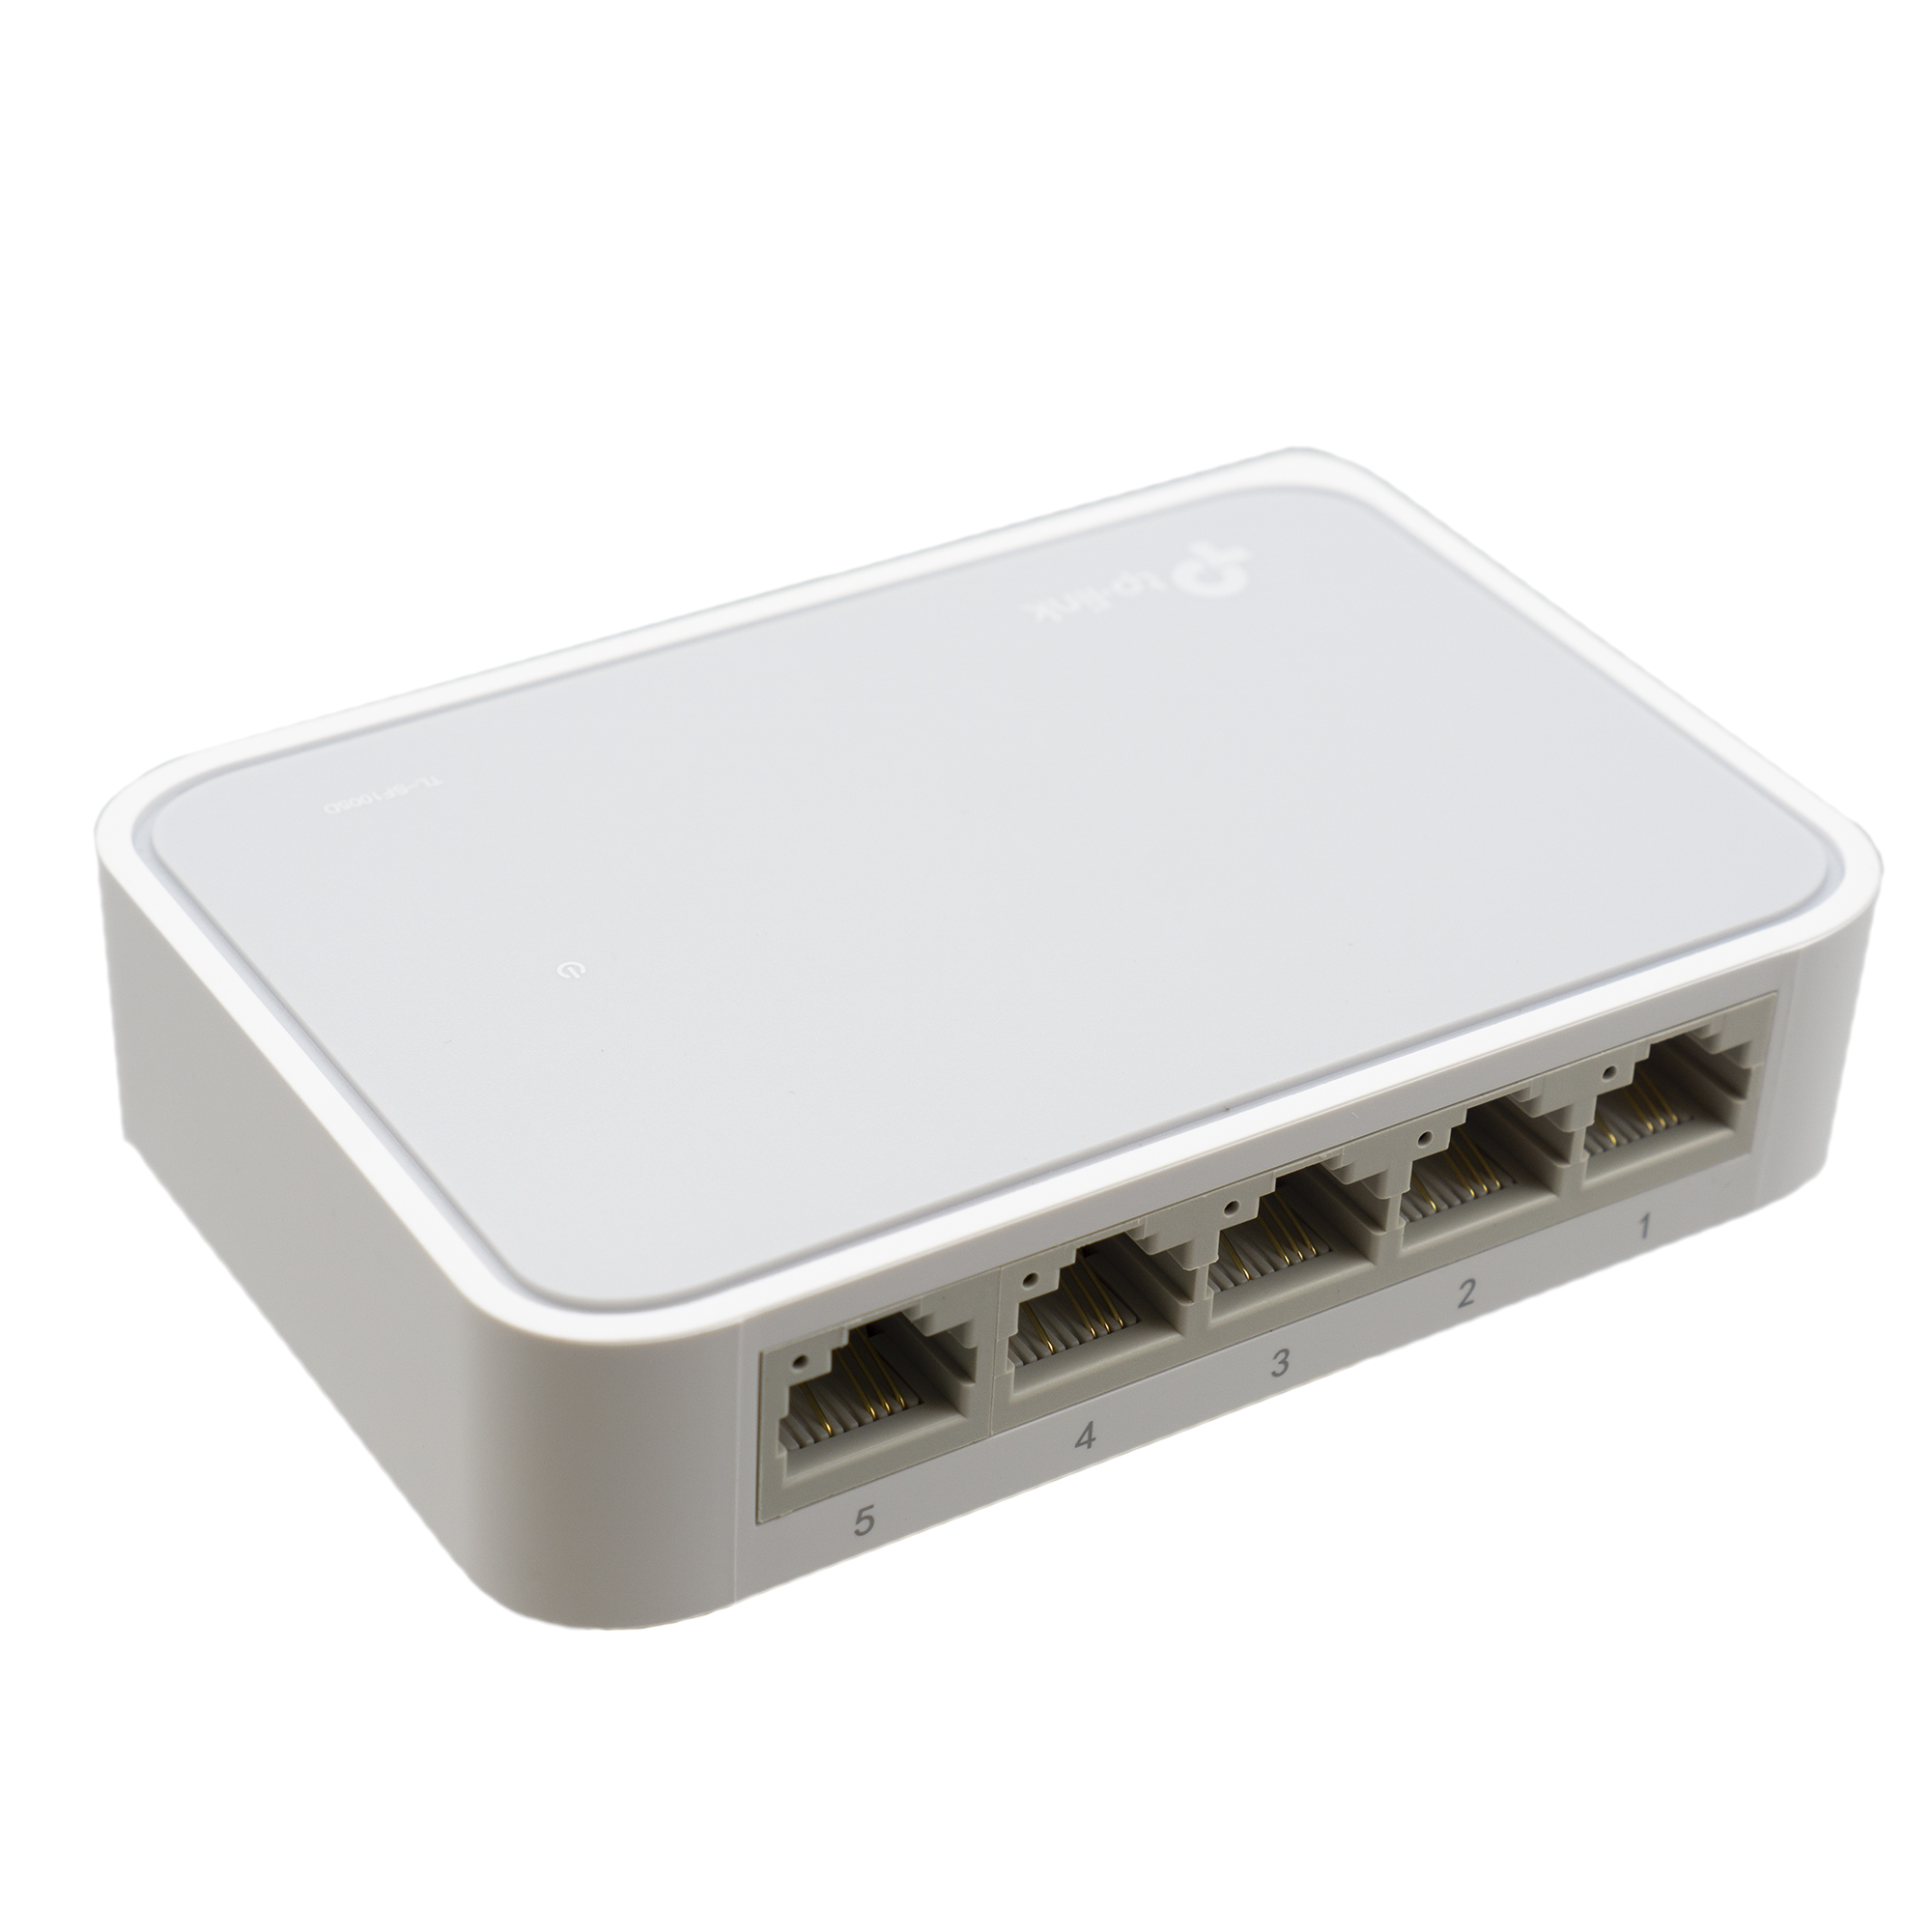 5 port Fast Ethernet Switch, 10/100, Auto-Negotiation